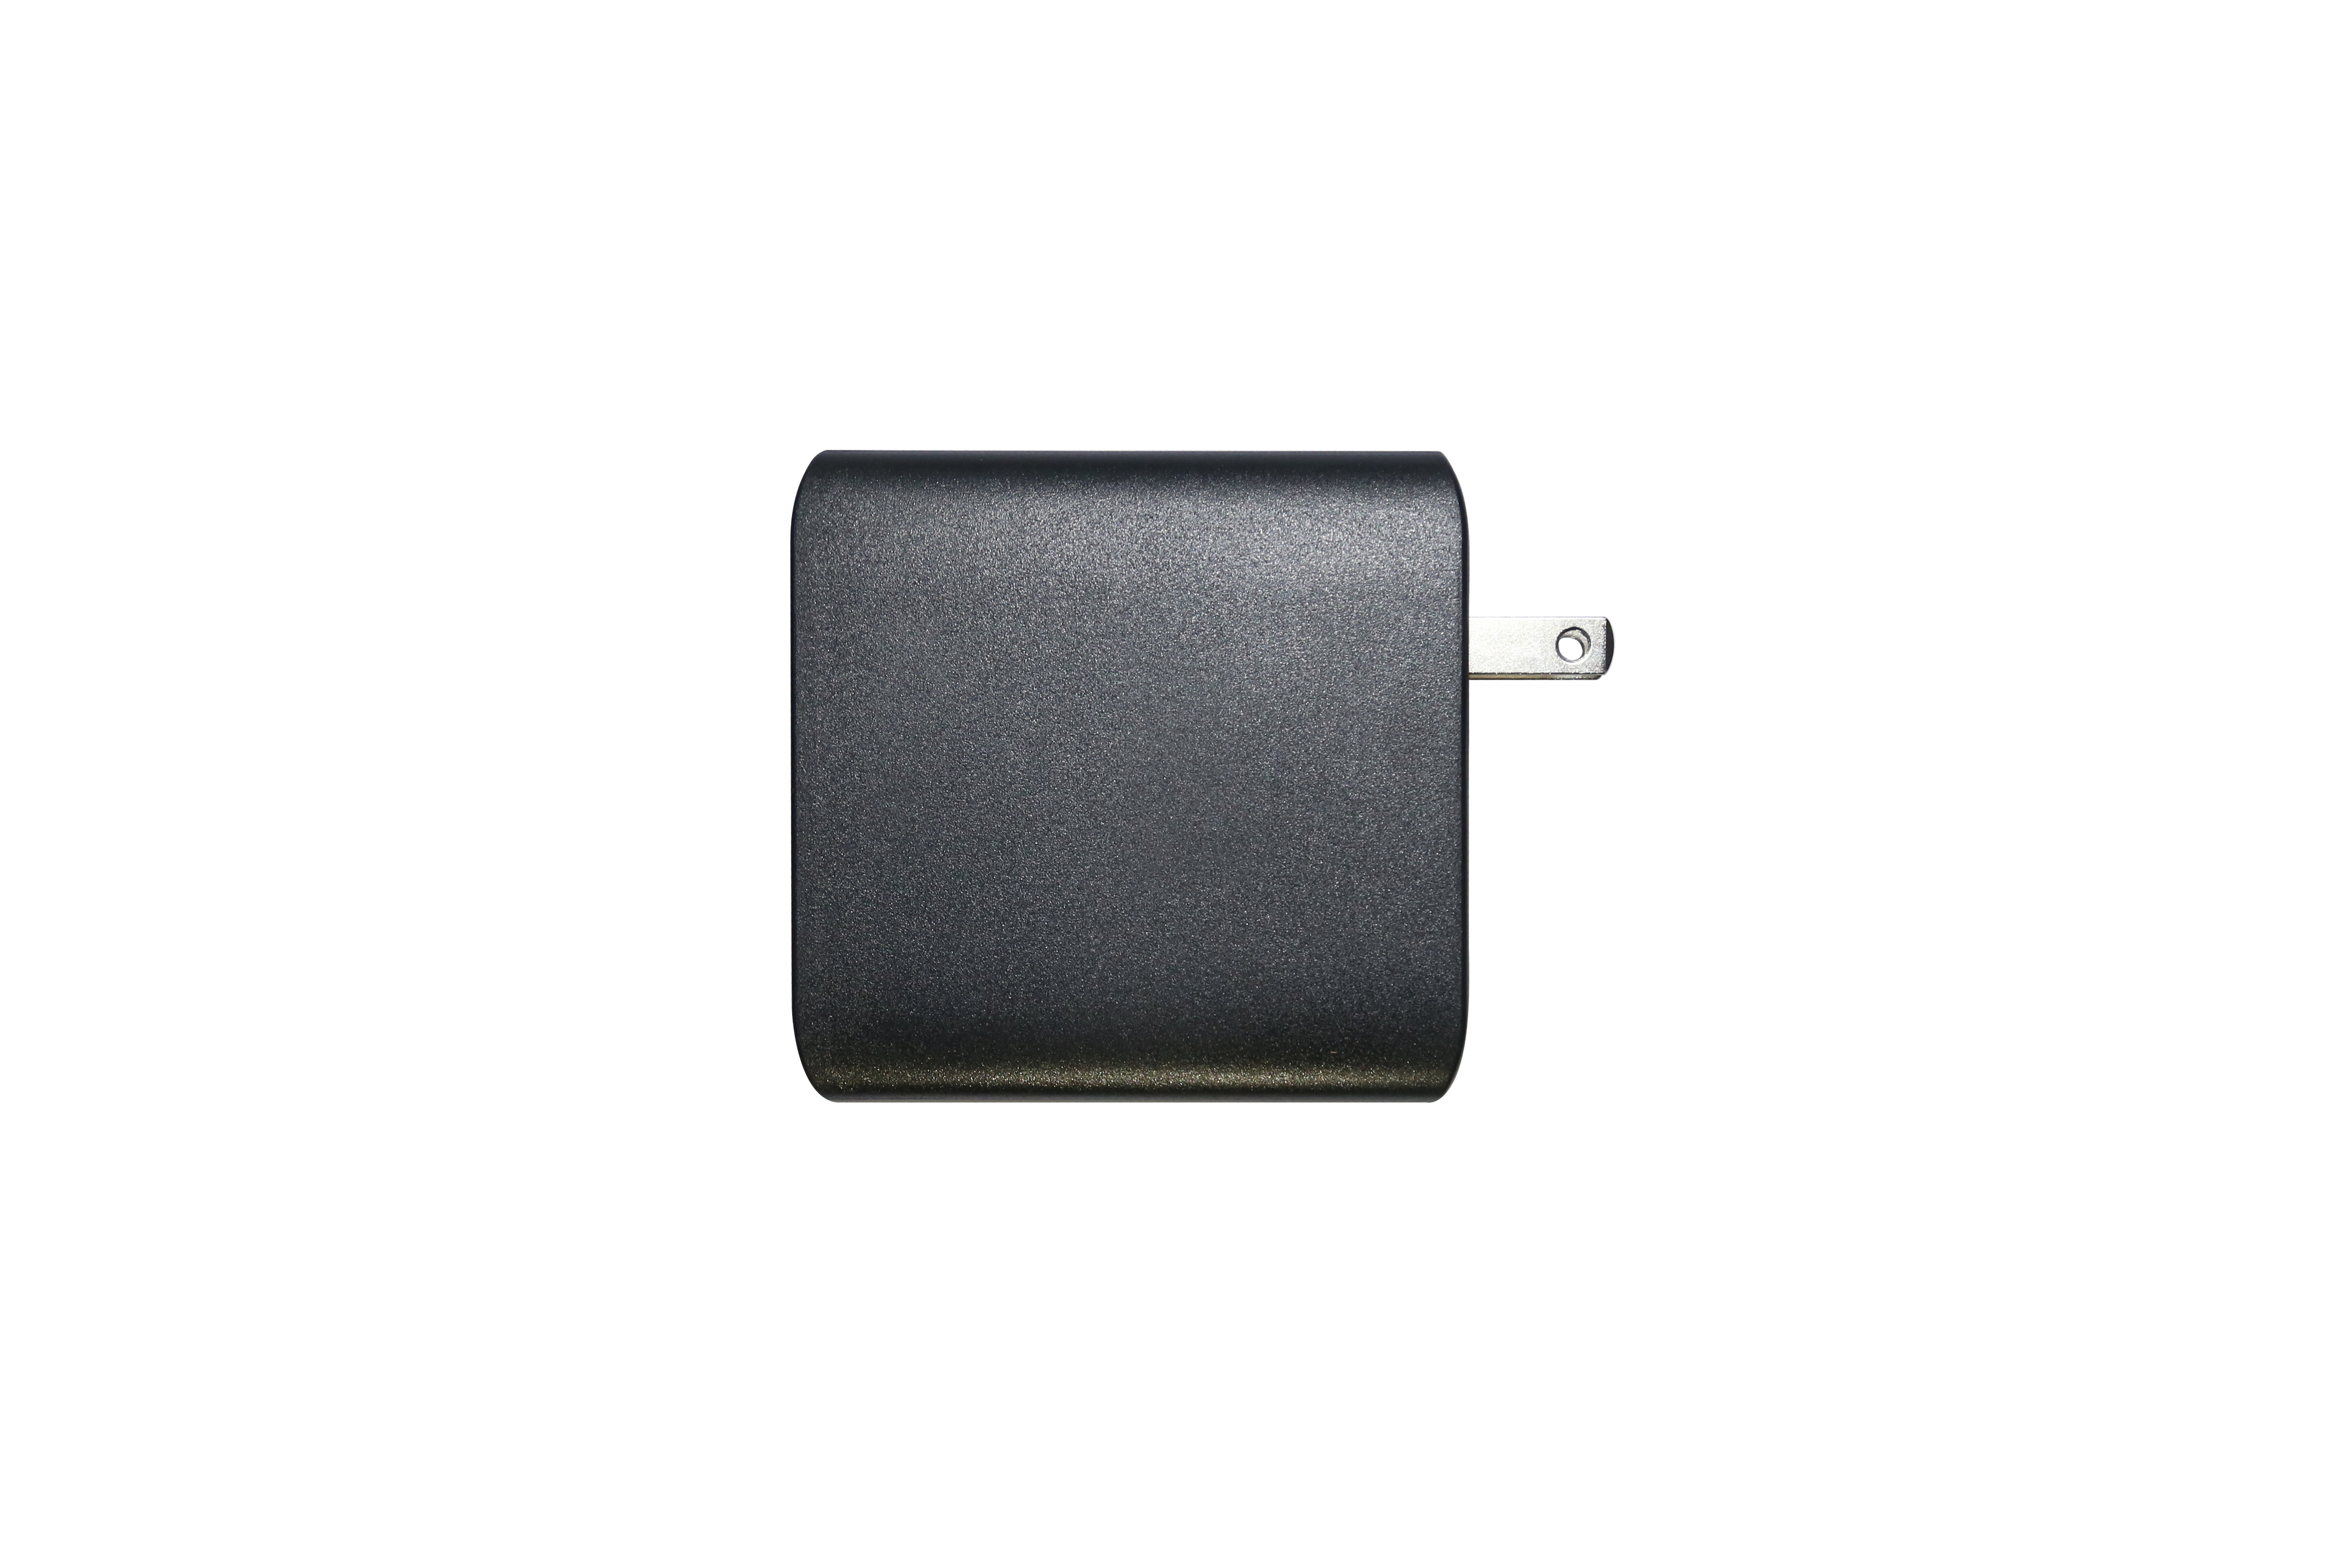 Charger for ONE-NETBOOK / ONEXPLAYER Models